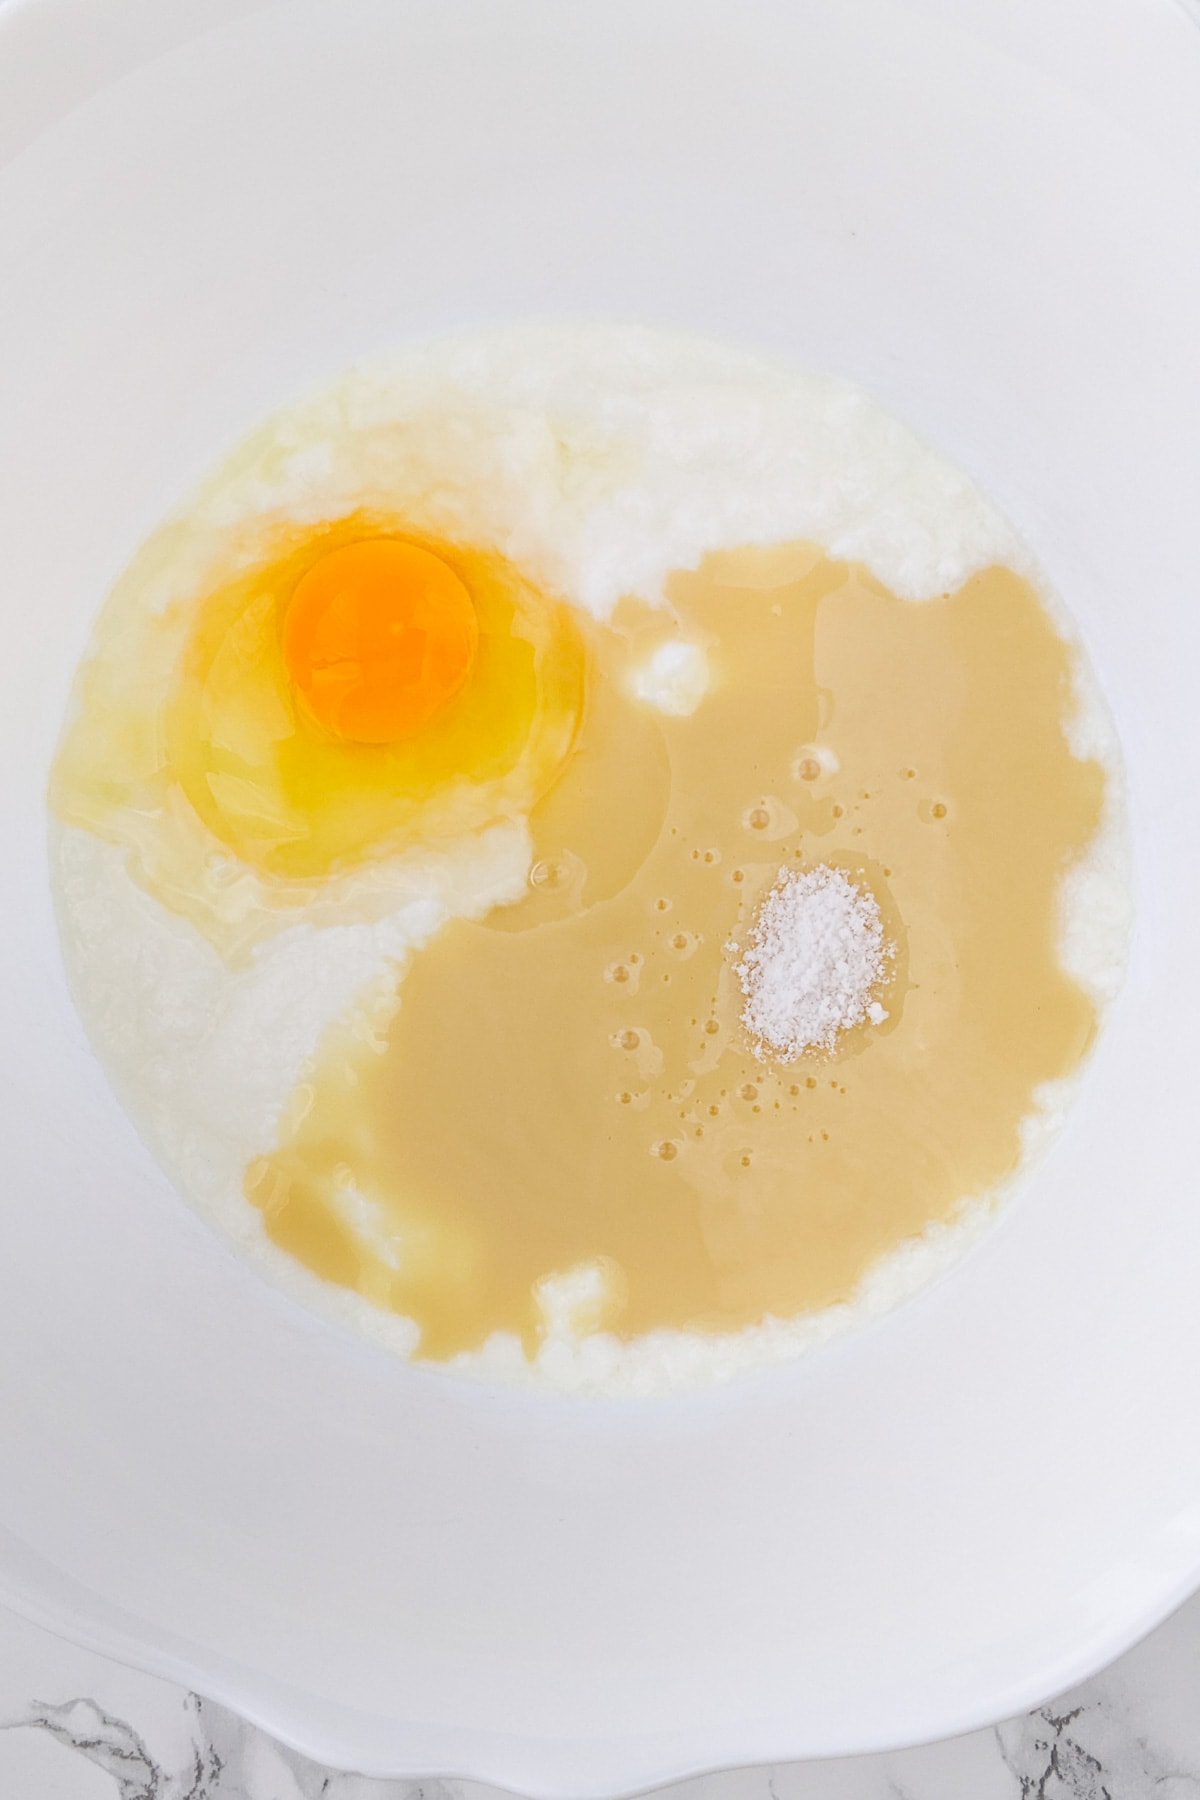 Top view of a deep bowl with yogurt, condensed milk and an egg.